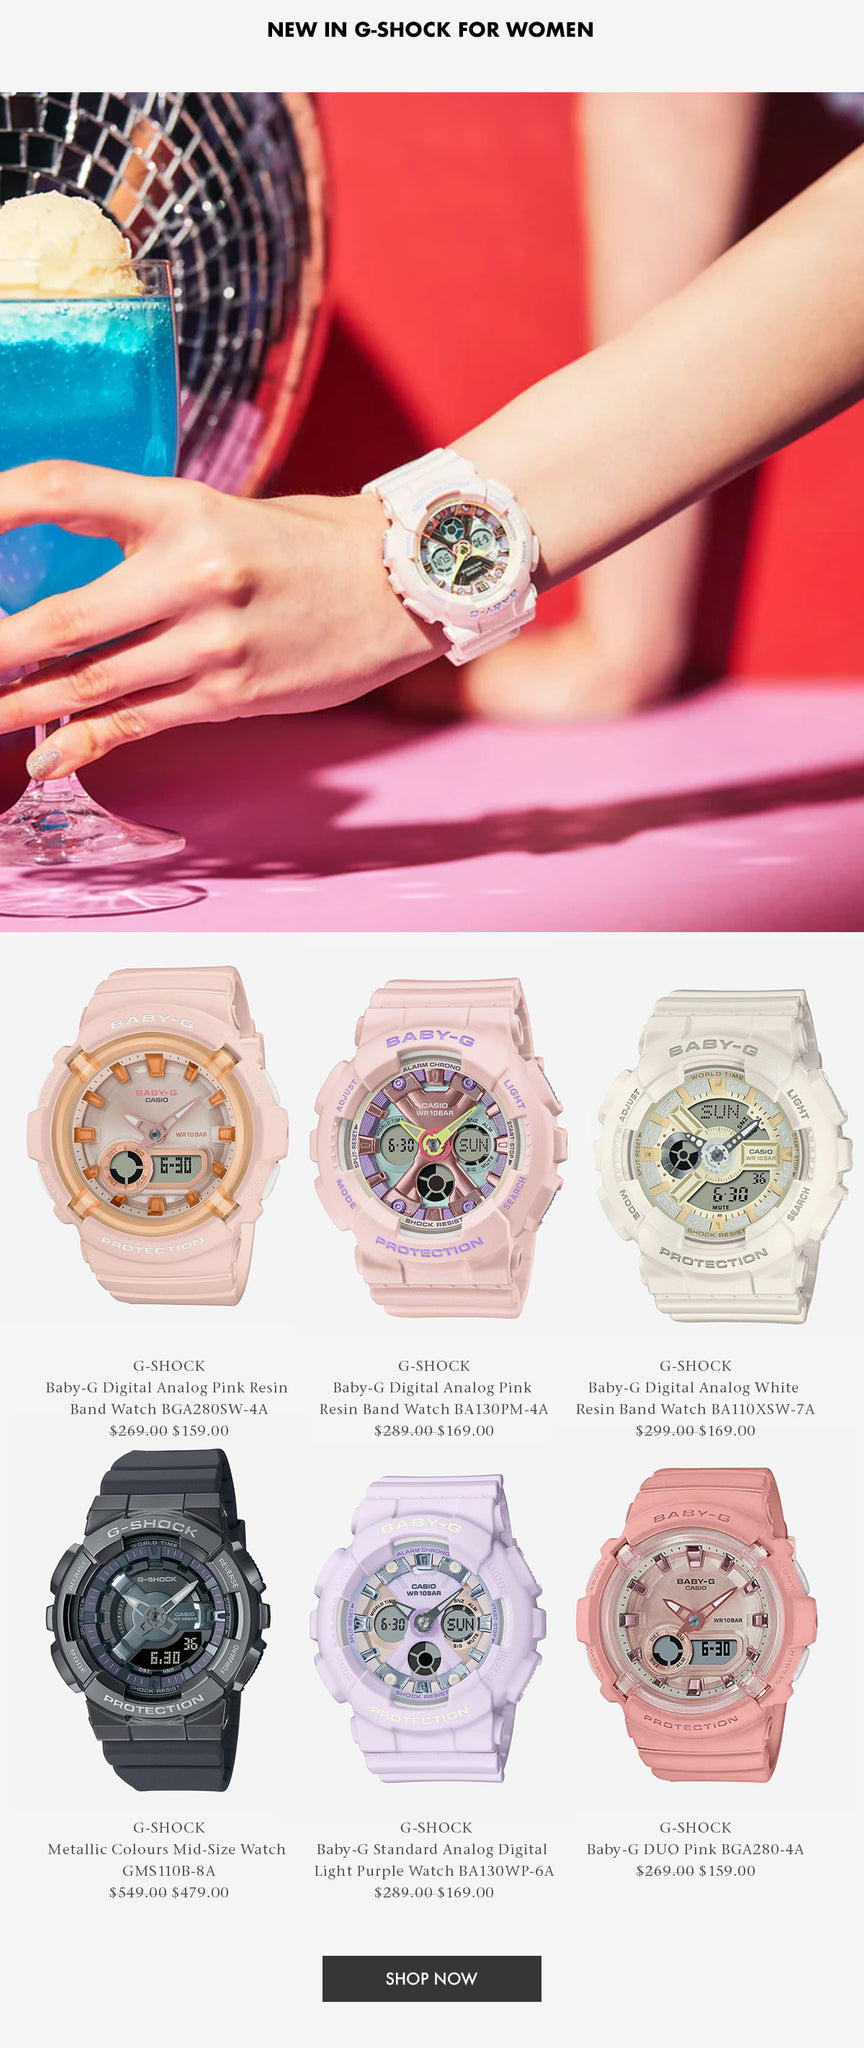 New releases from G-Shock for women! Shop Now.